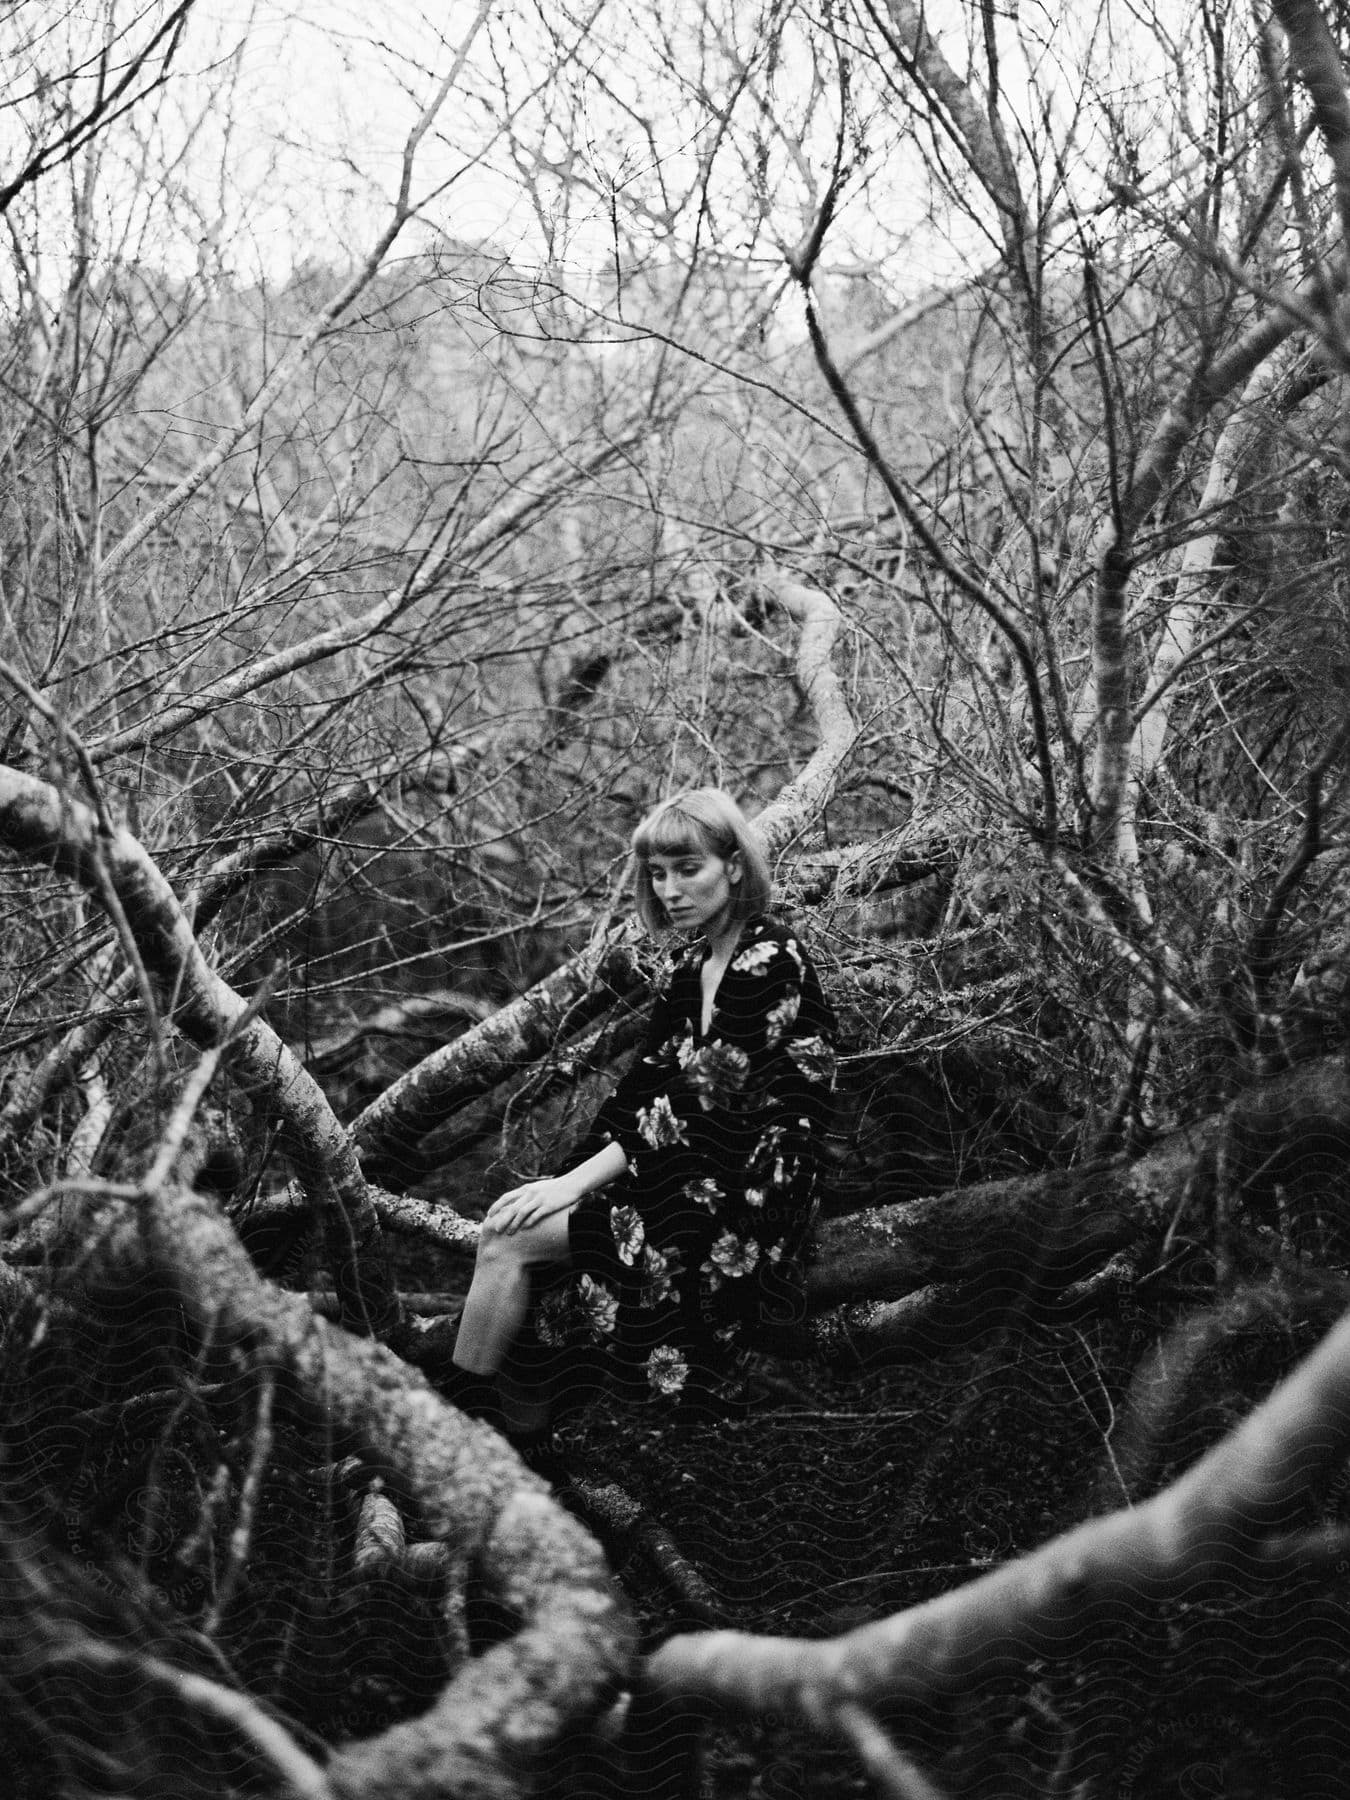 A woman in a floral dress is sitting contemplatively among gnarled tree branches.